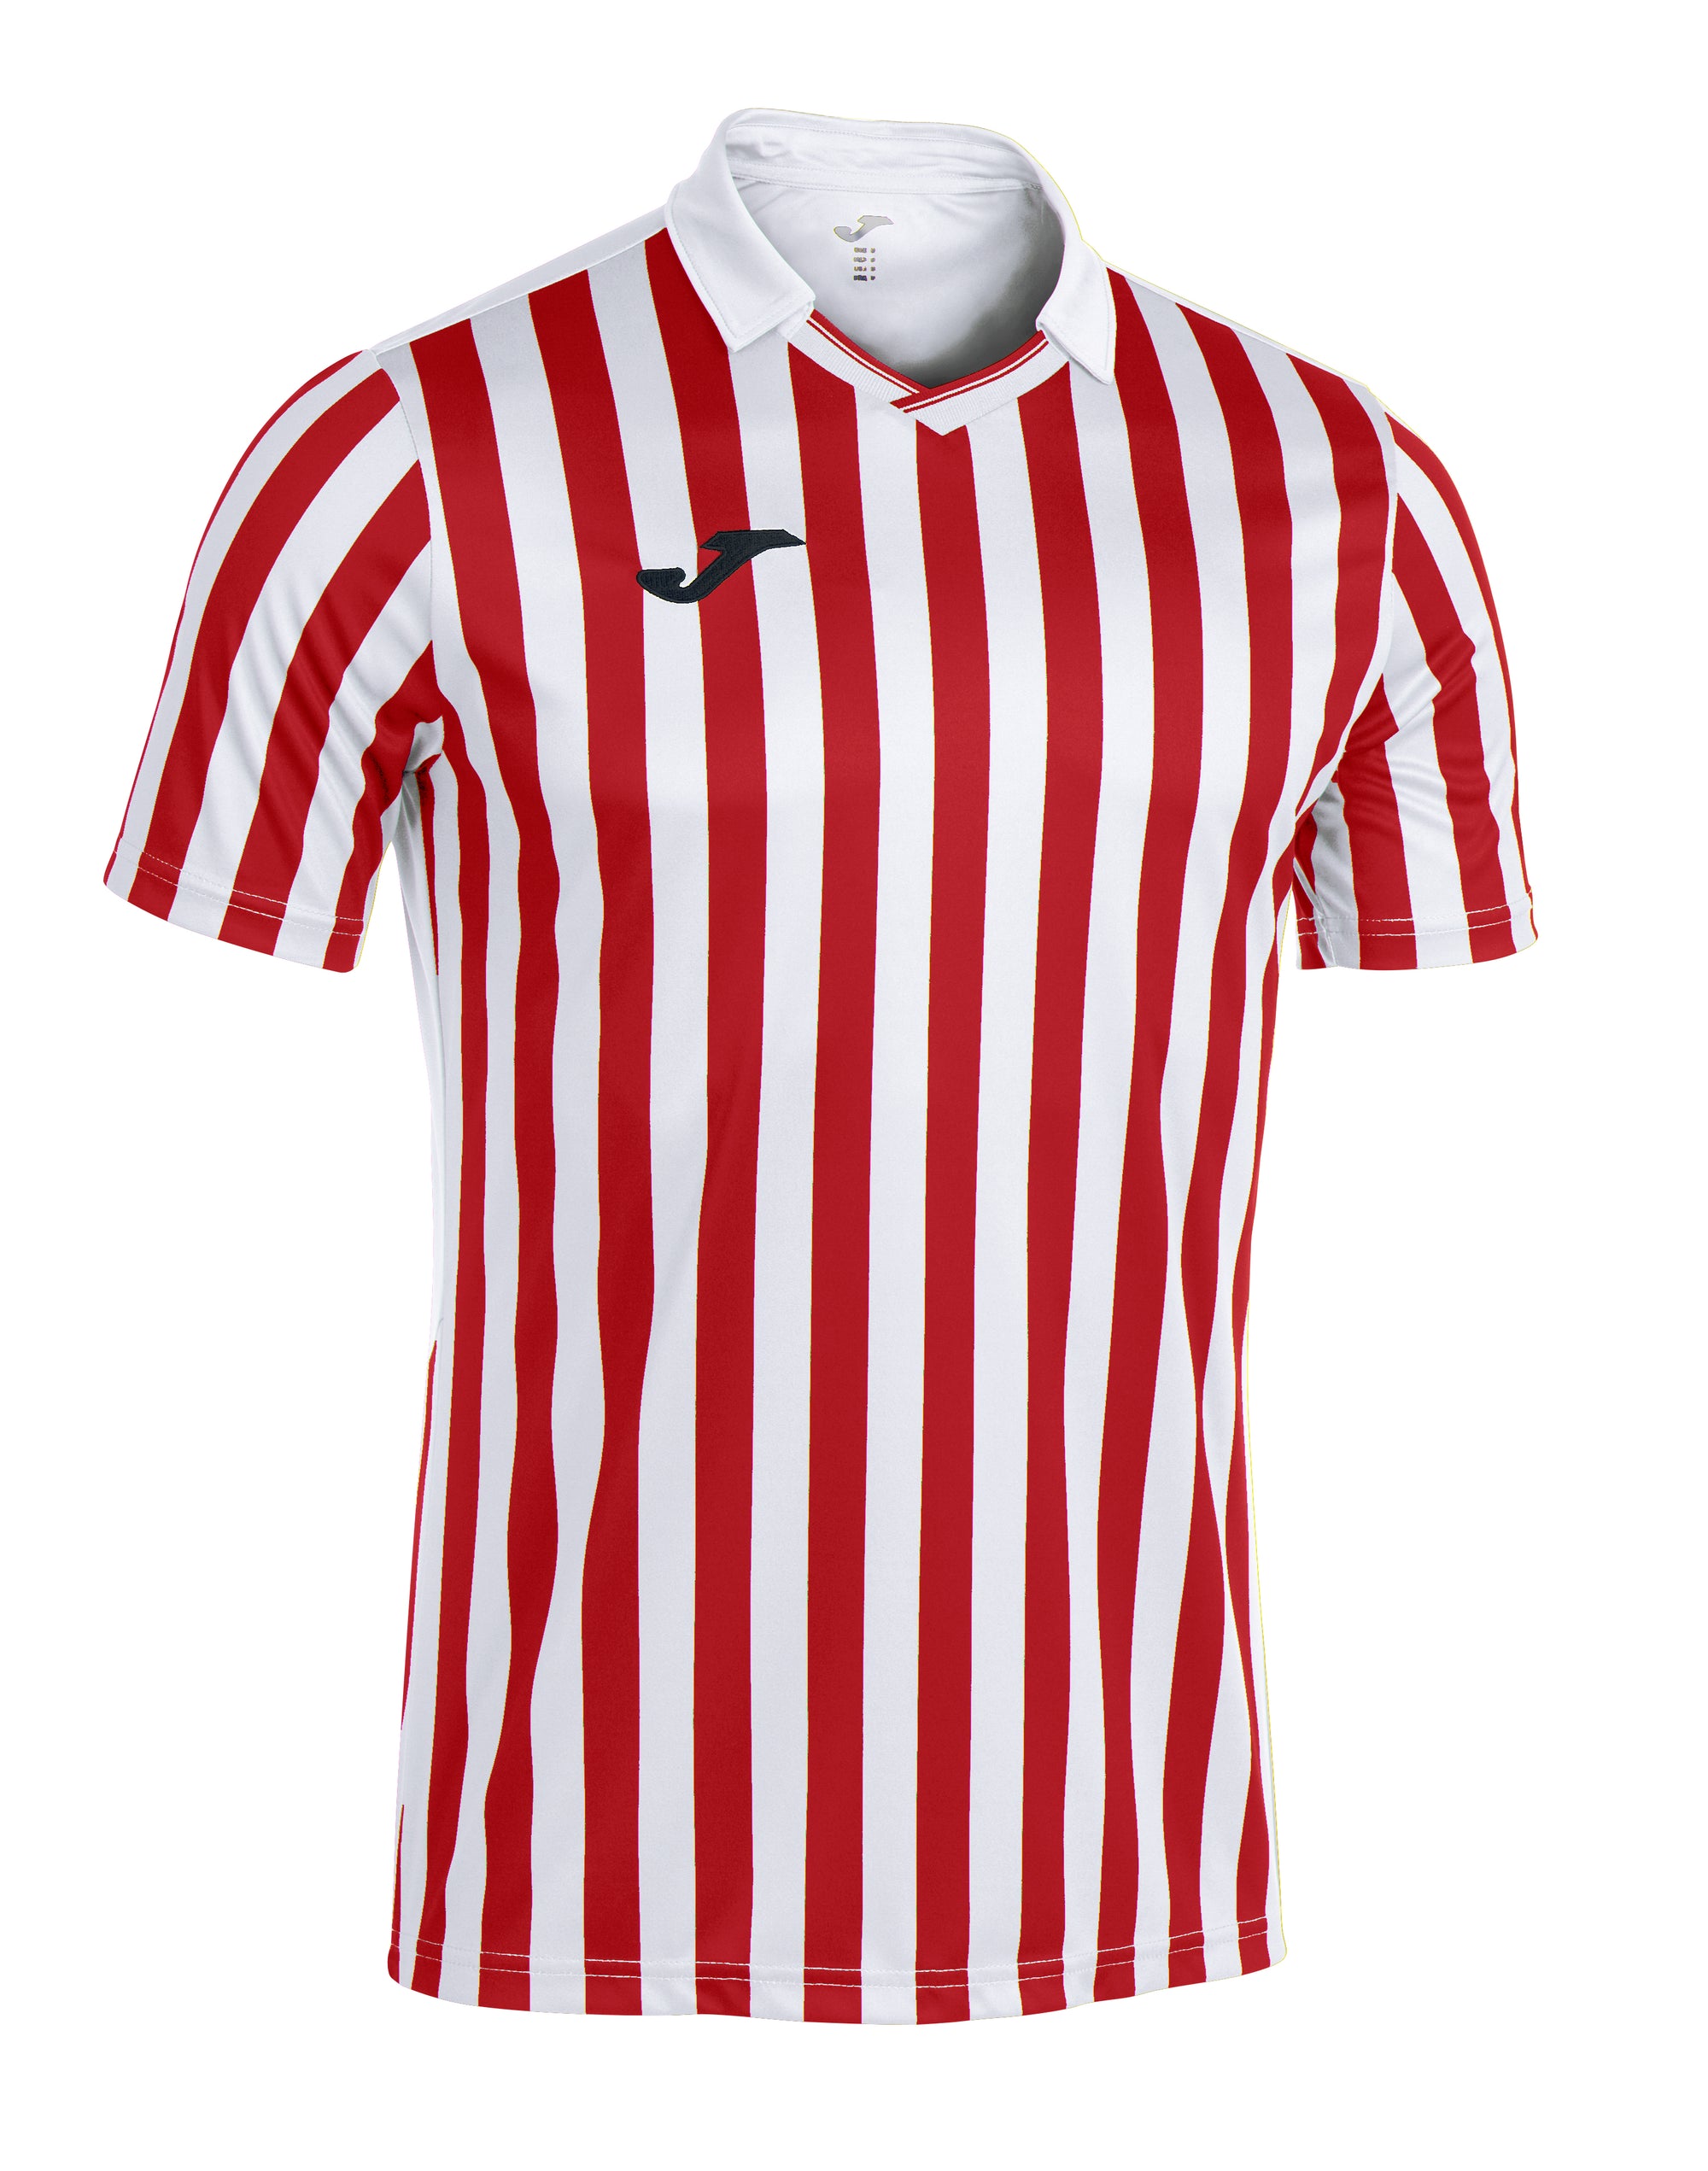 Joma Copa II Short Sleeved T-Shirt - Red/White